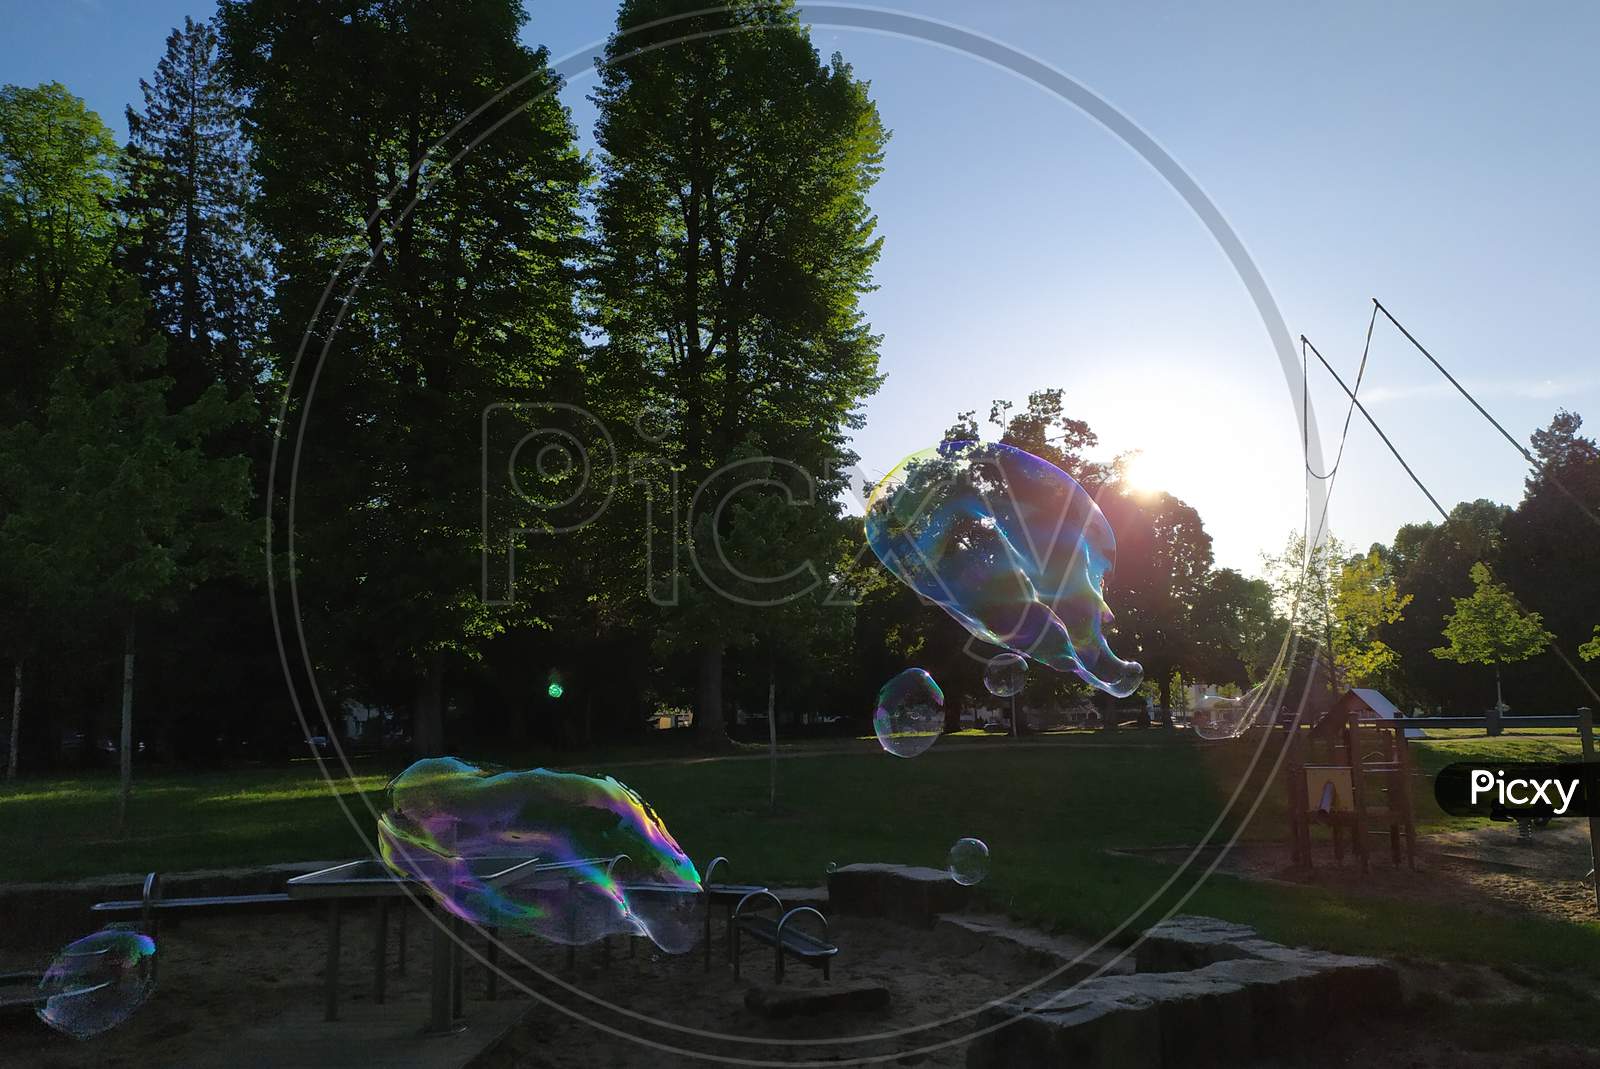 Gigantic soap bubbles shimmer and glimmer in the sun as colorful kids fun with fragile lightness as giant mega enormous bubbles spread joy and happiness blowing in the wind and sparkling in the sun